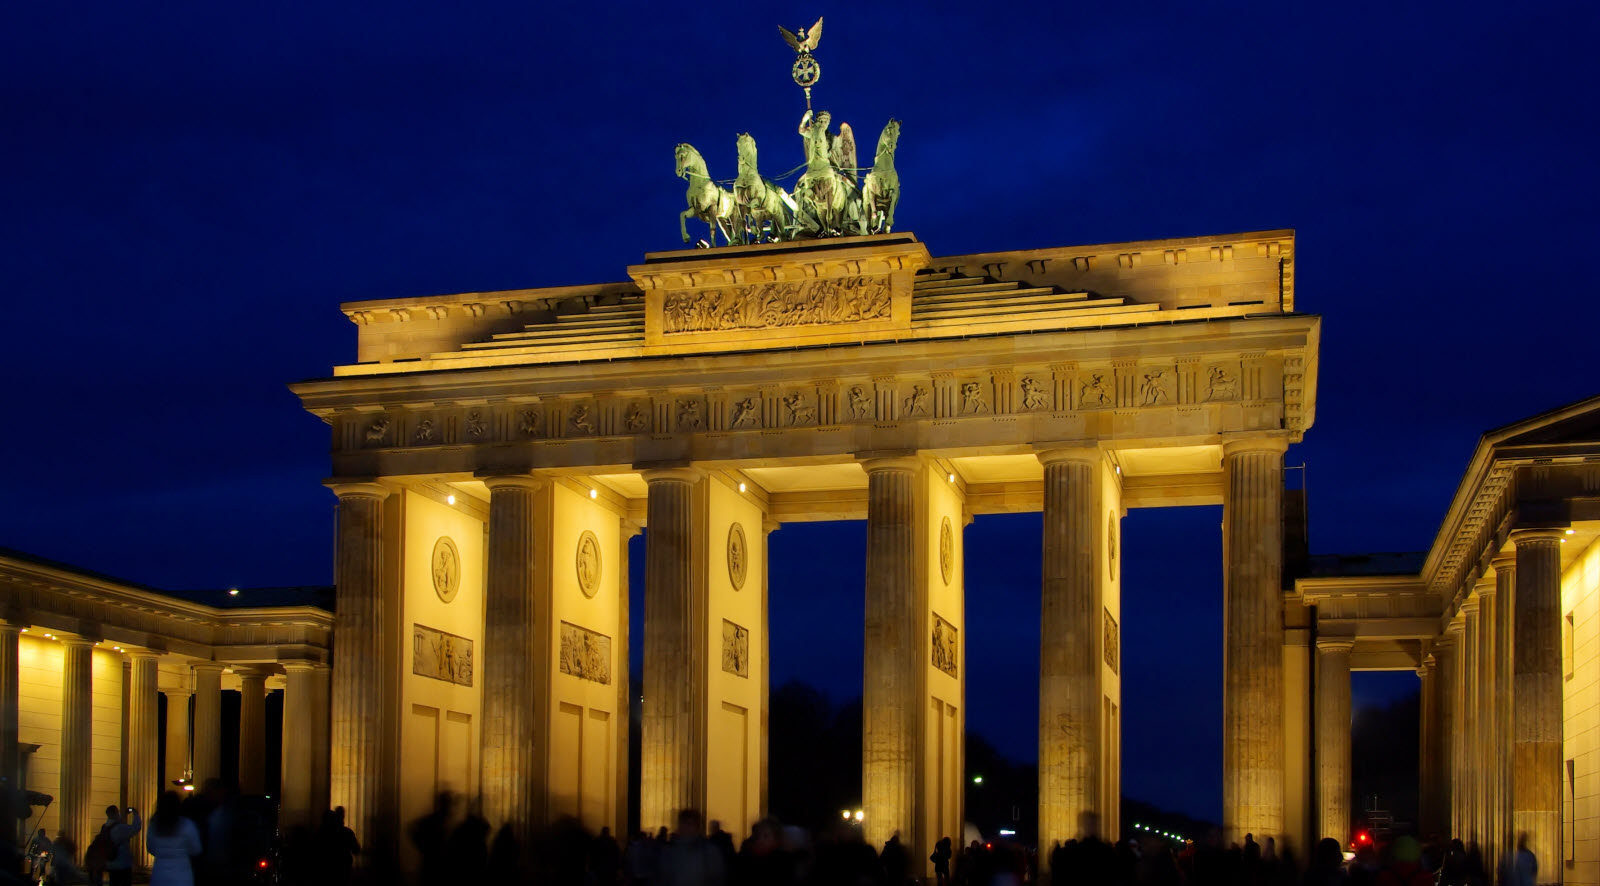 Amazing Berlin Pictures & Backgrounds